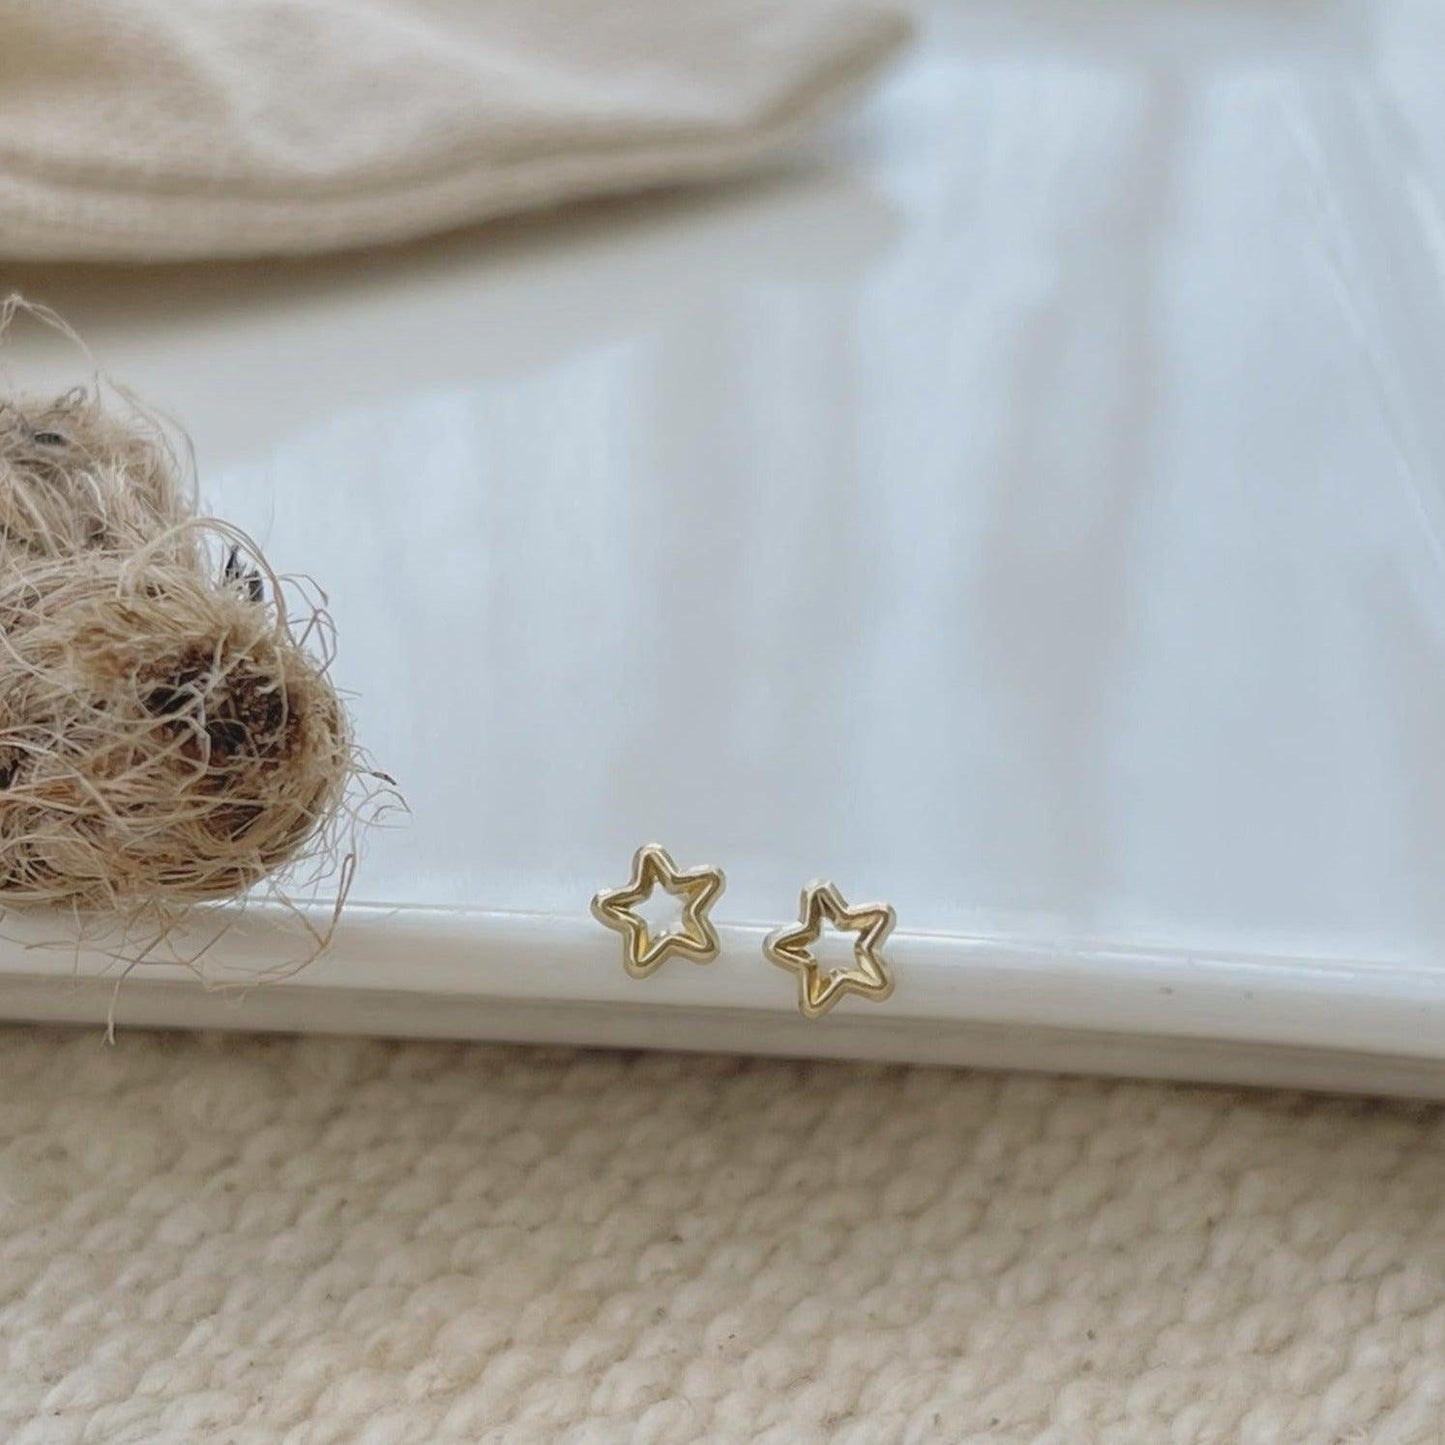 These minimalist screw-back star stud earrings are the perfect gift! Show off your unique personality with these gold bit earrings. 